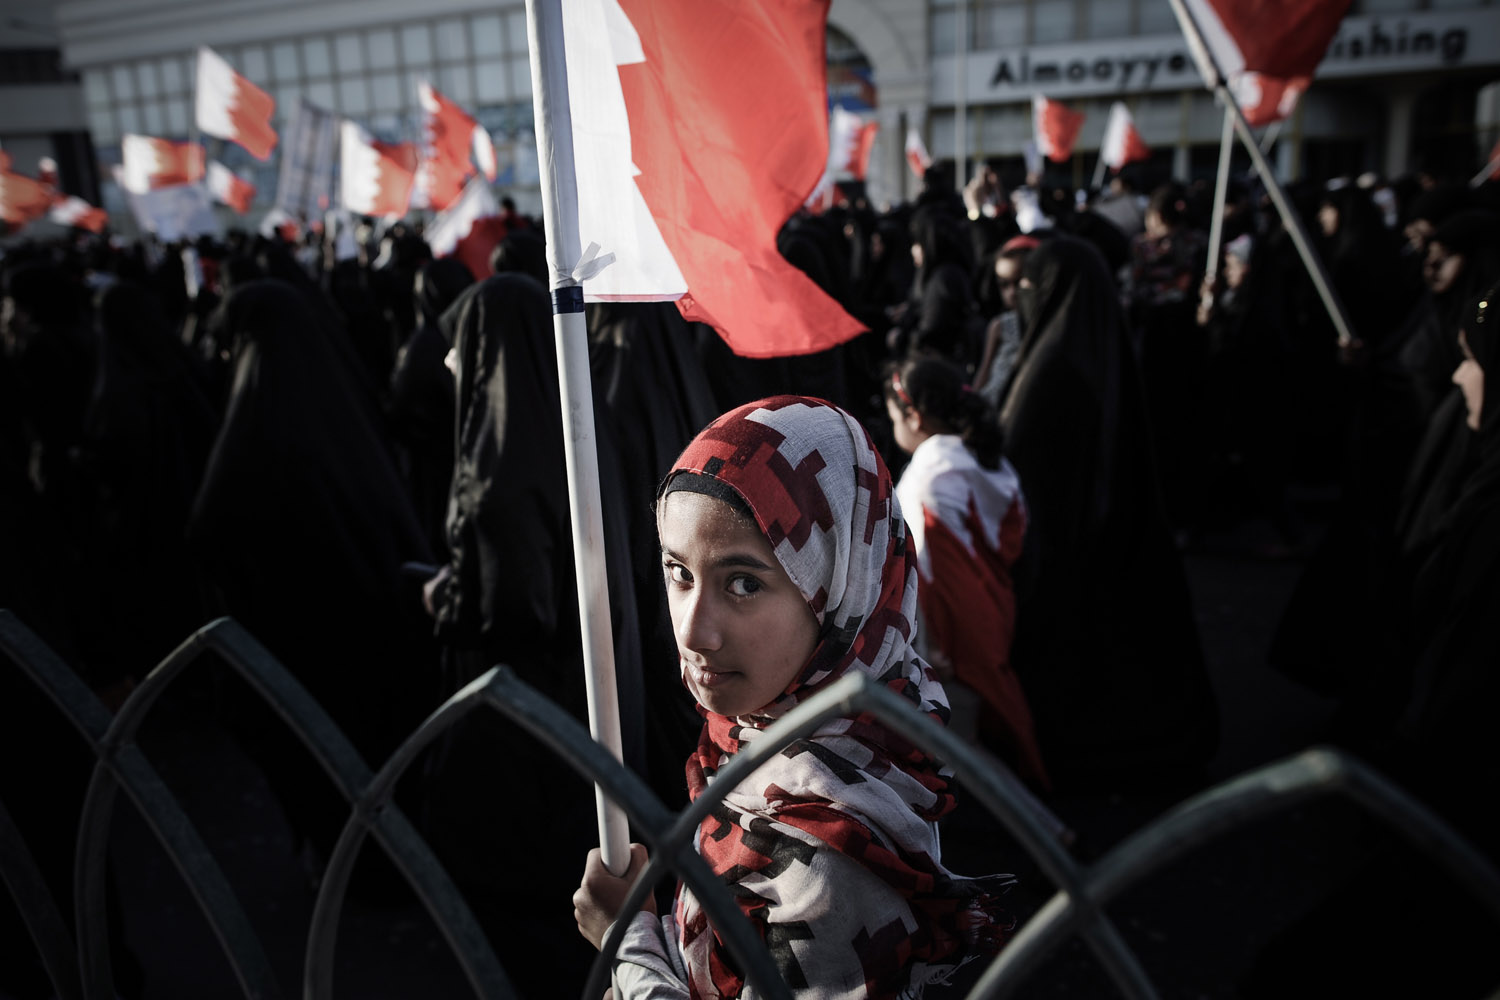 March 22, 2013. A Bahraini girl holds a national flag during an anti-government rally in solidarity with jailed human rights activist, Nabeel Rajab in the village of Belad Al Qadeem, in a suburb of Manama. The International Federation for Human Rights says around 80 people have been killed in Bahrain since violence first broke out on February 14, 2011 when thousands of protesters camped out in Manama's Pearl Square, taking their cue from the Arab Spring uprisings.